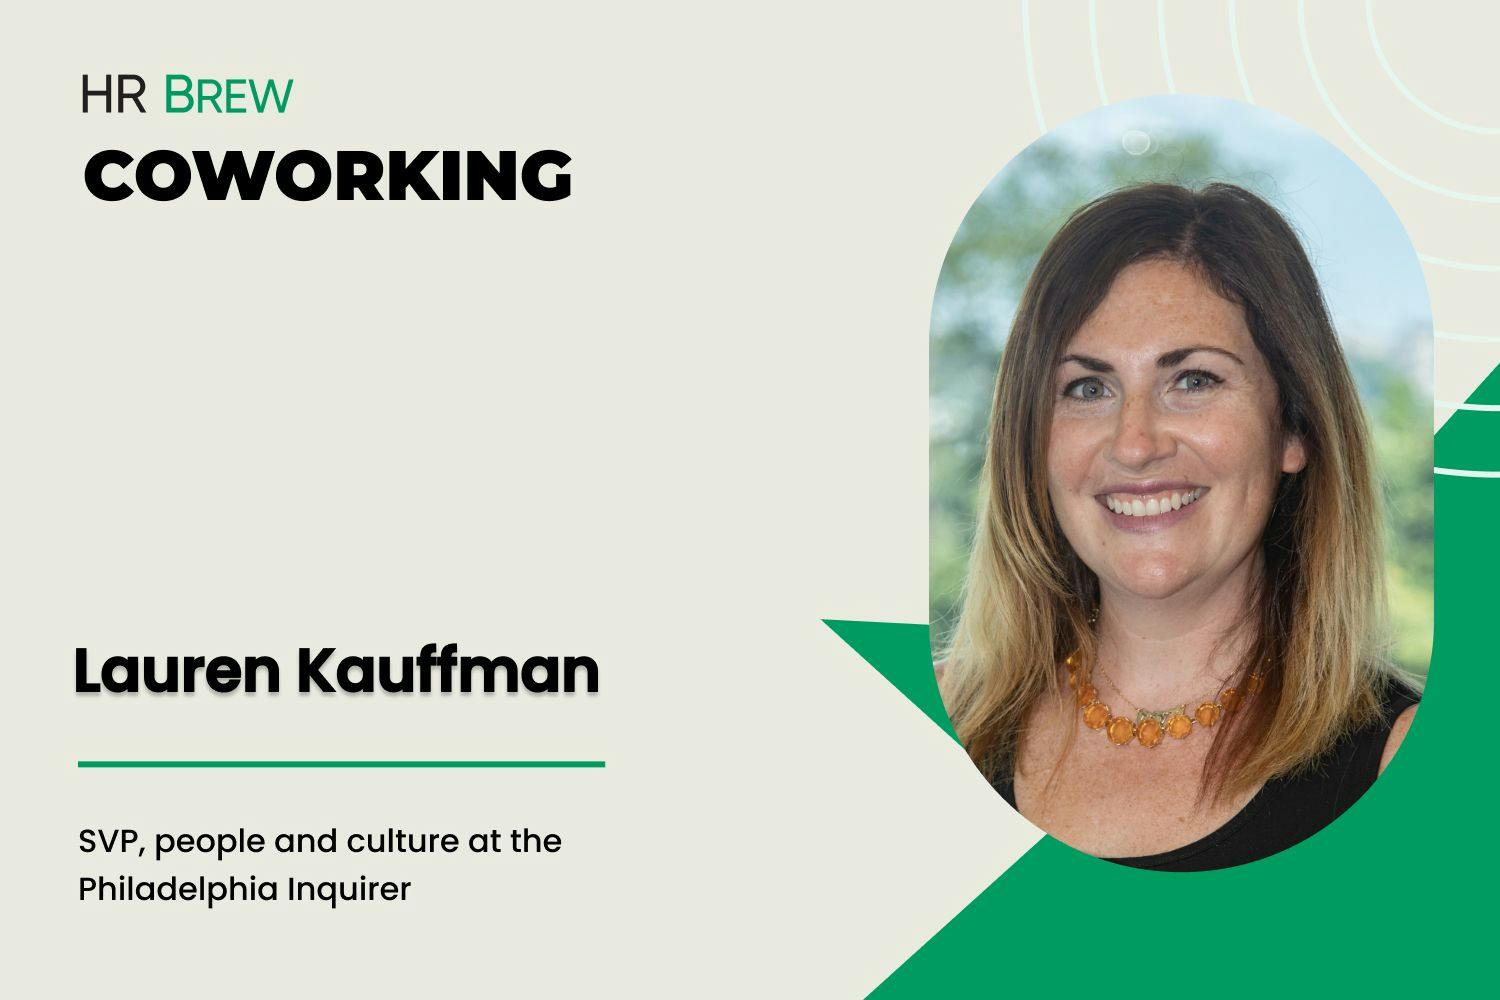 grey card that says lauren kauffman, SVP, people and culture at the Philadelphia Inquirer, next to oval cut out of headshot of brunette woman with highlights smiling